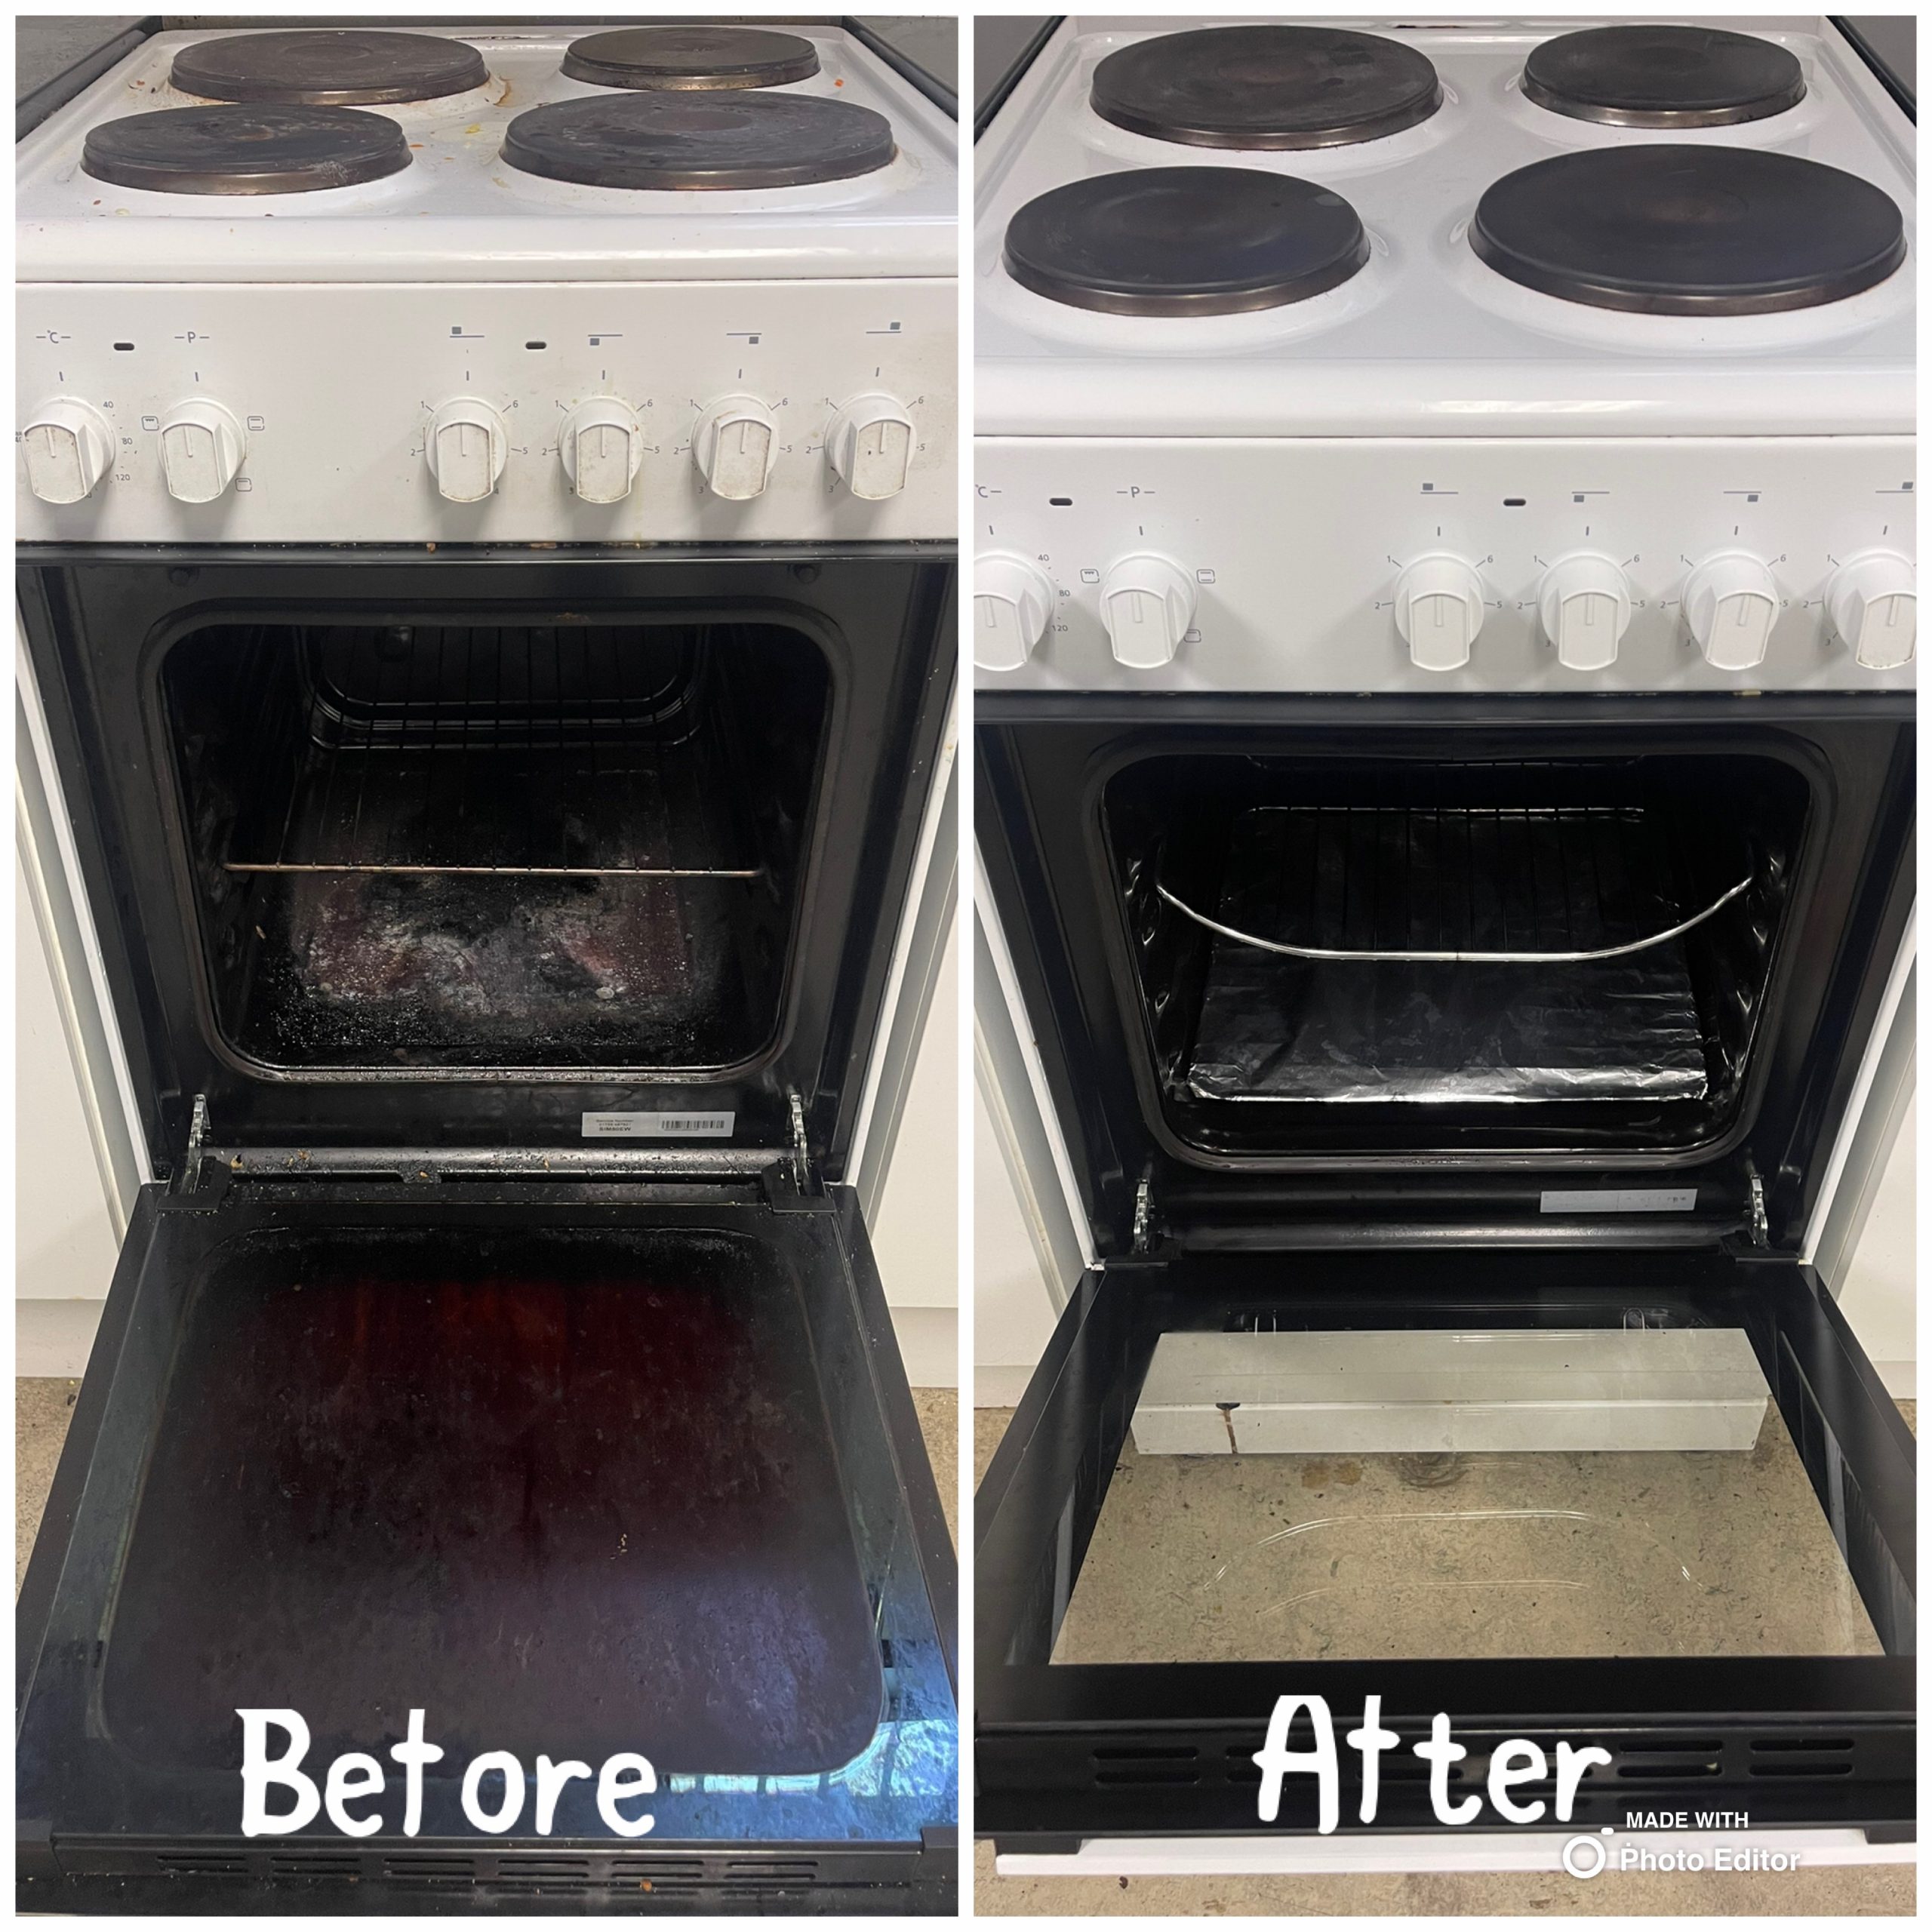 Professional oven cleaning services in all of London